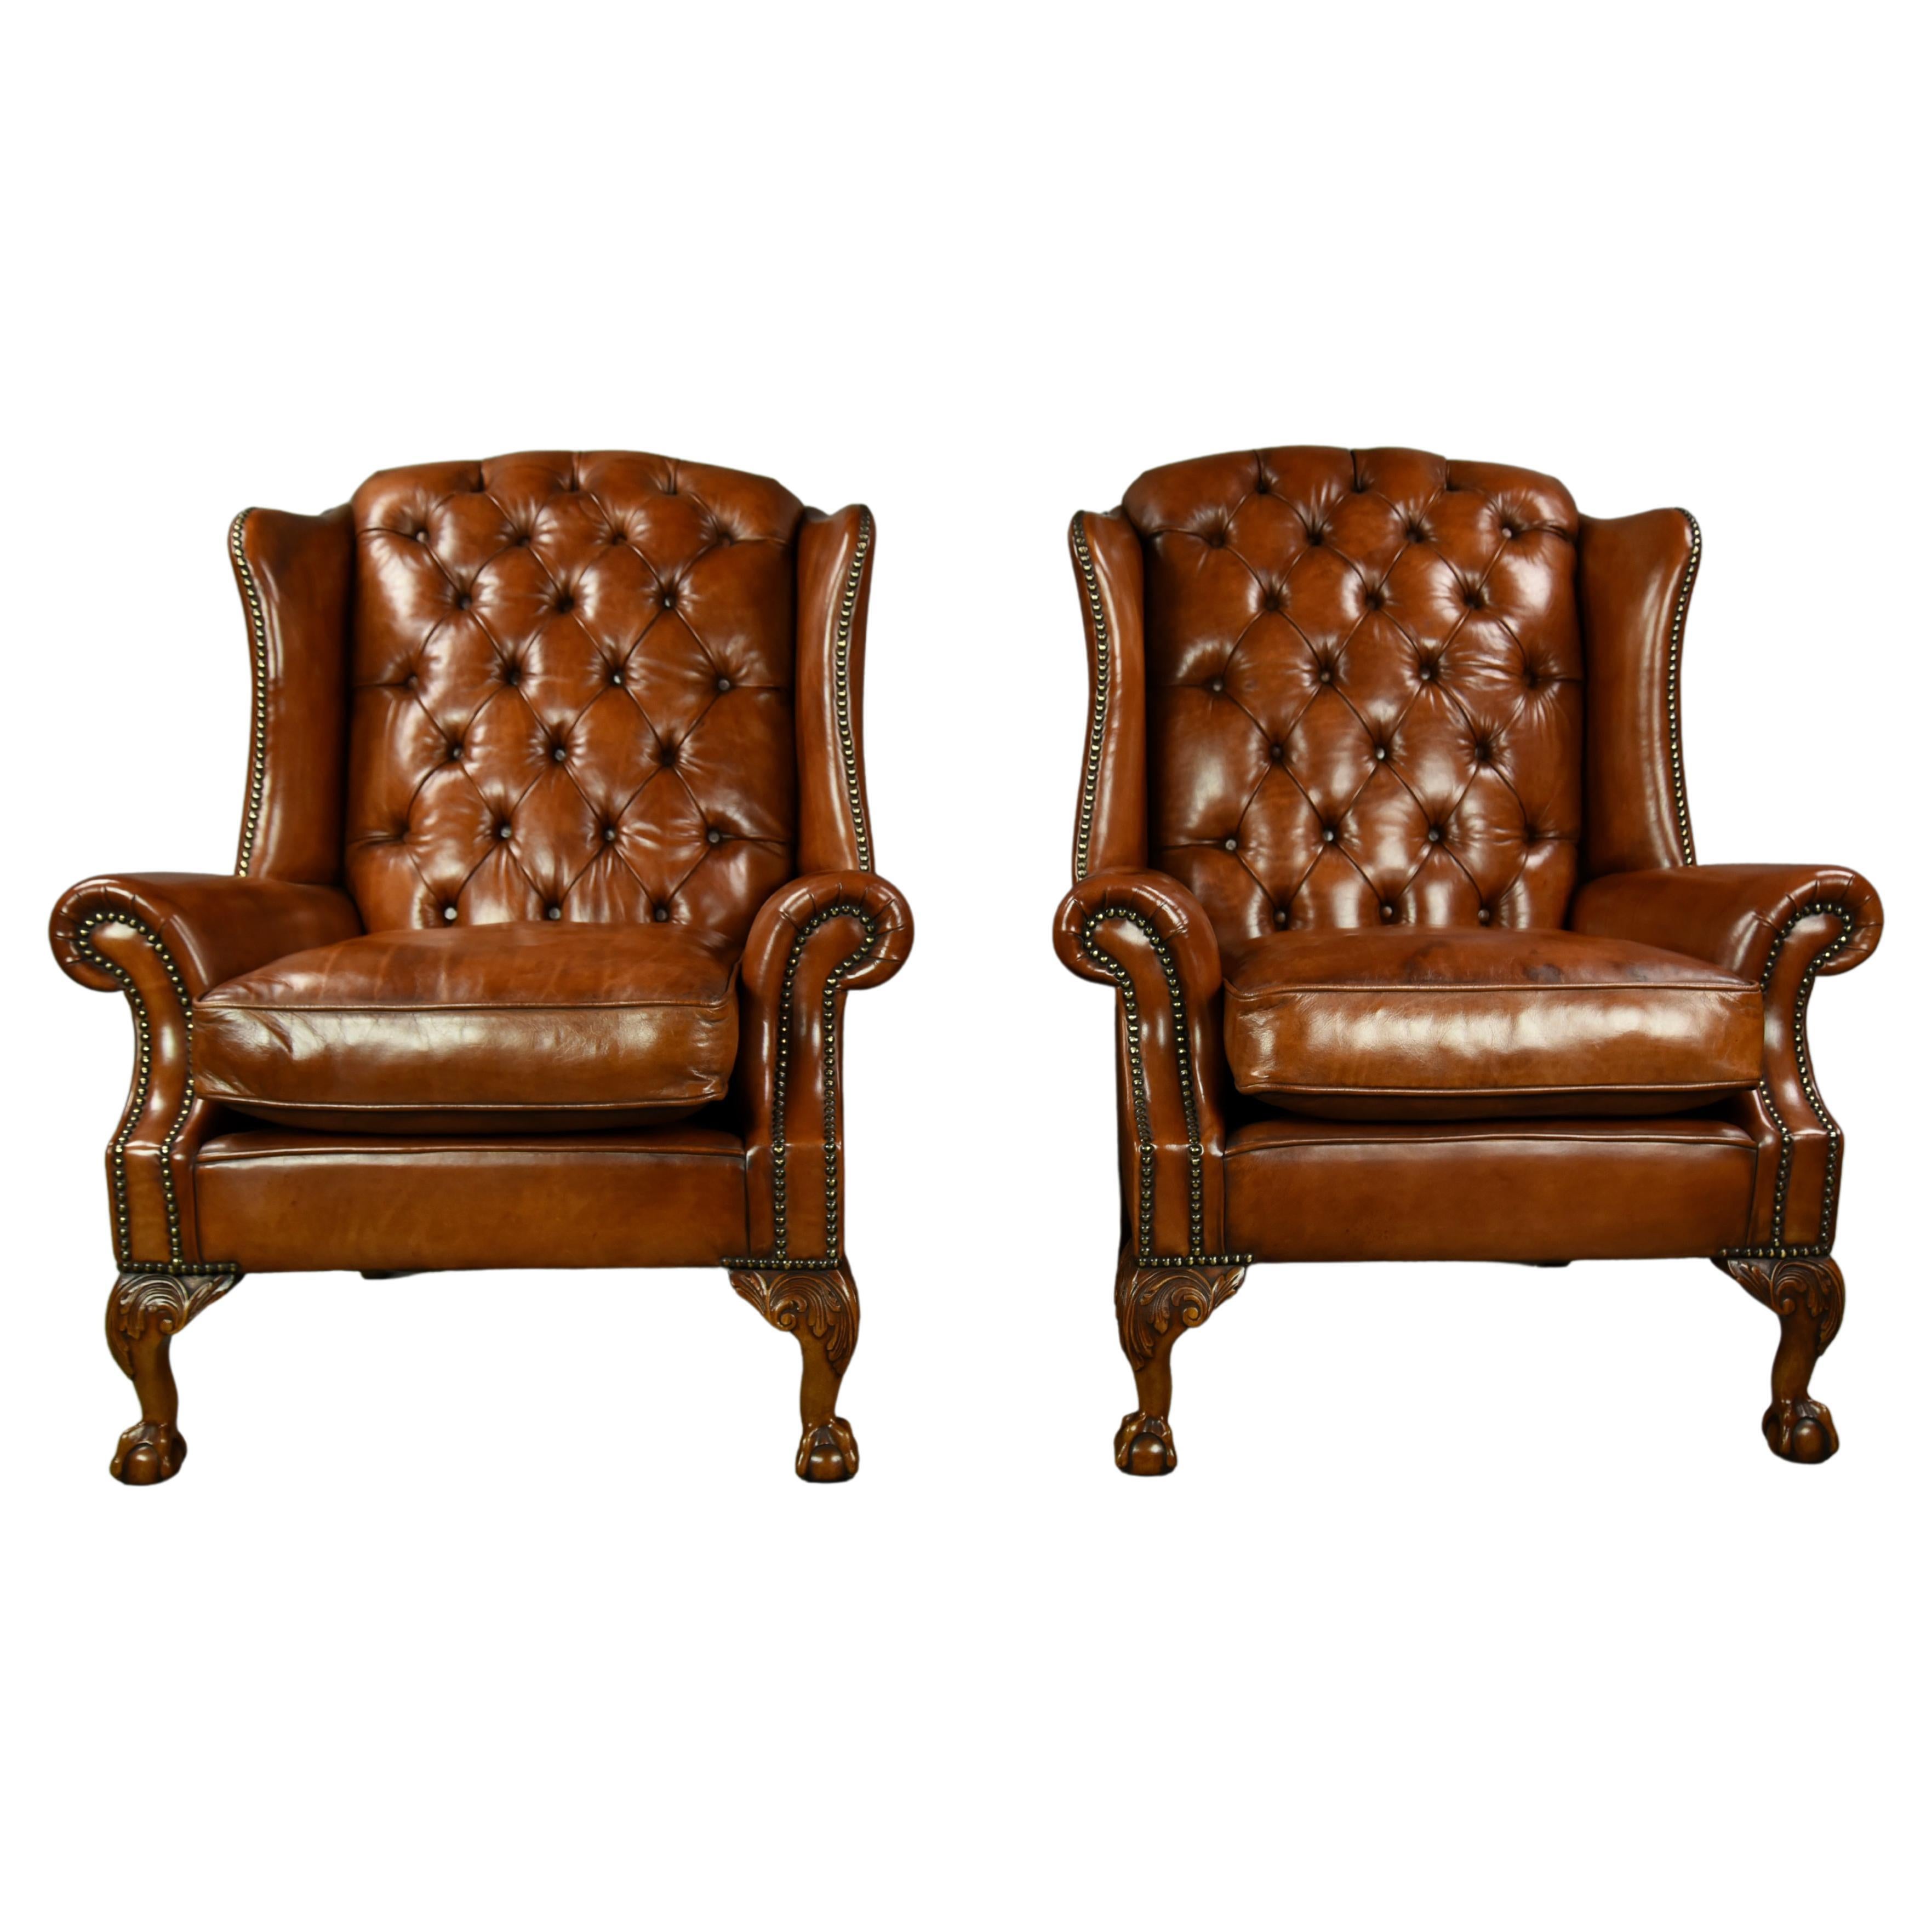 Antique Pair of Georgian Style Wing Back Chairs